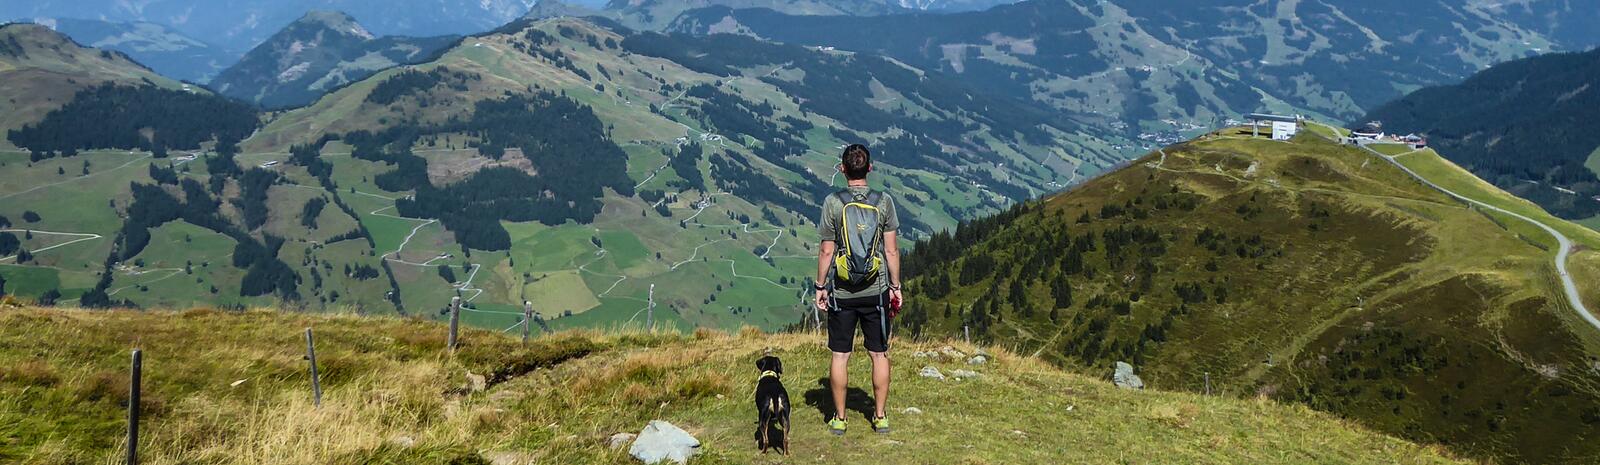 Beautiful views with dog. | © gehlebt.at